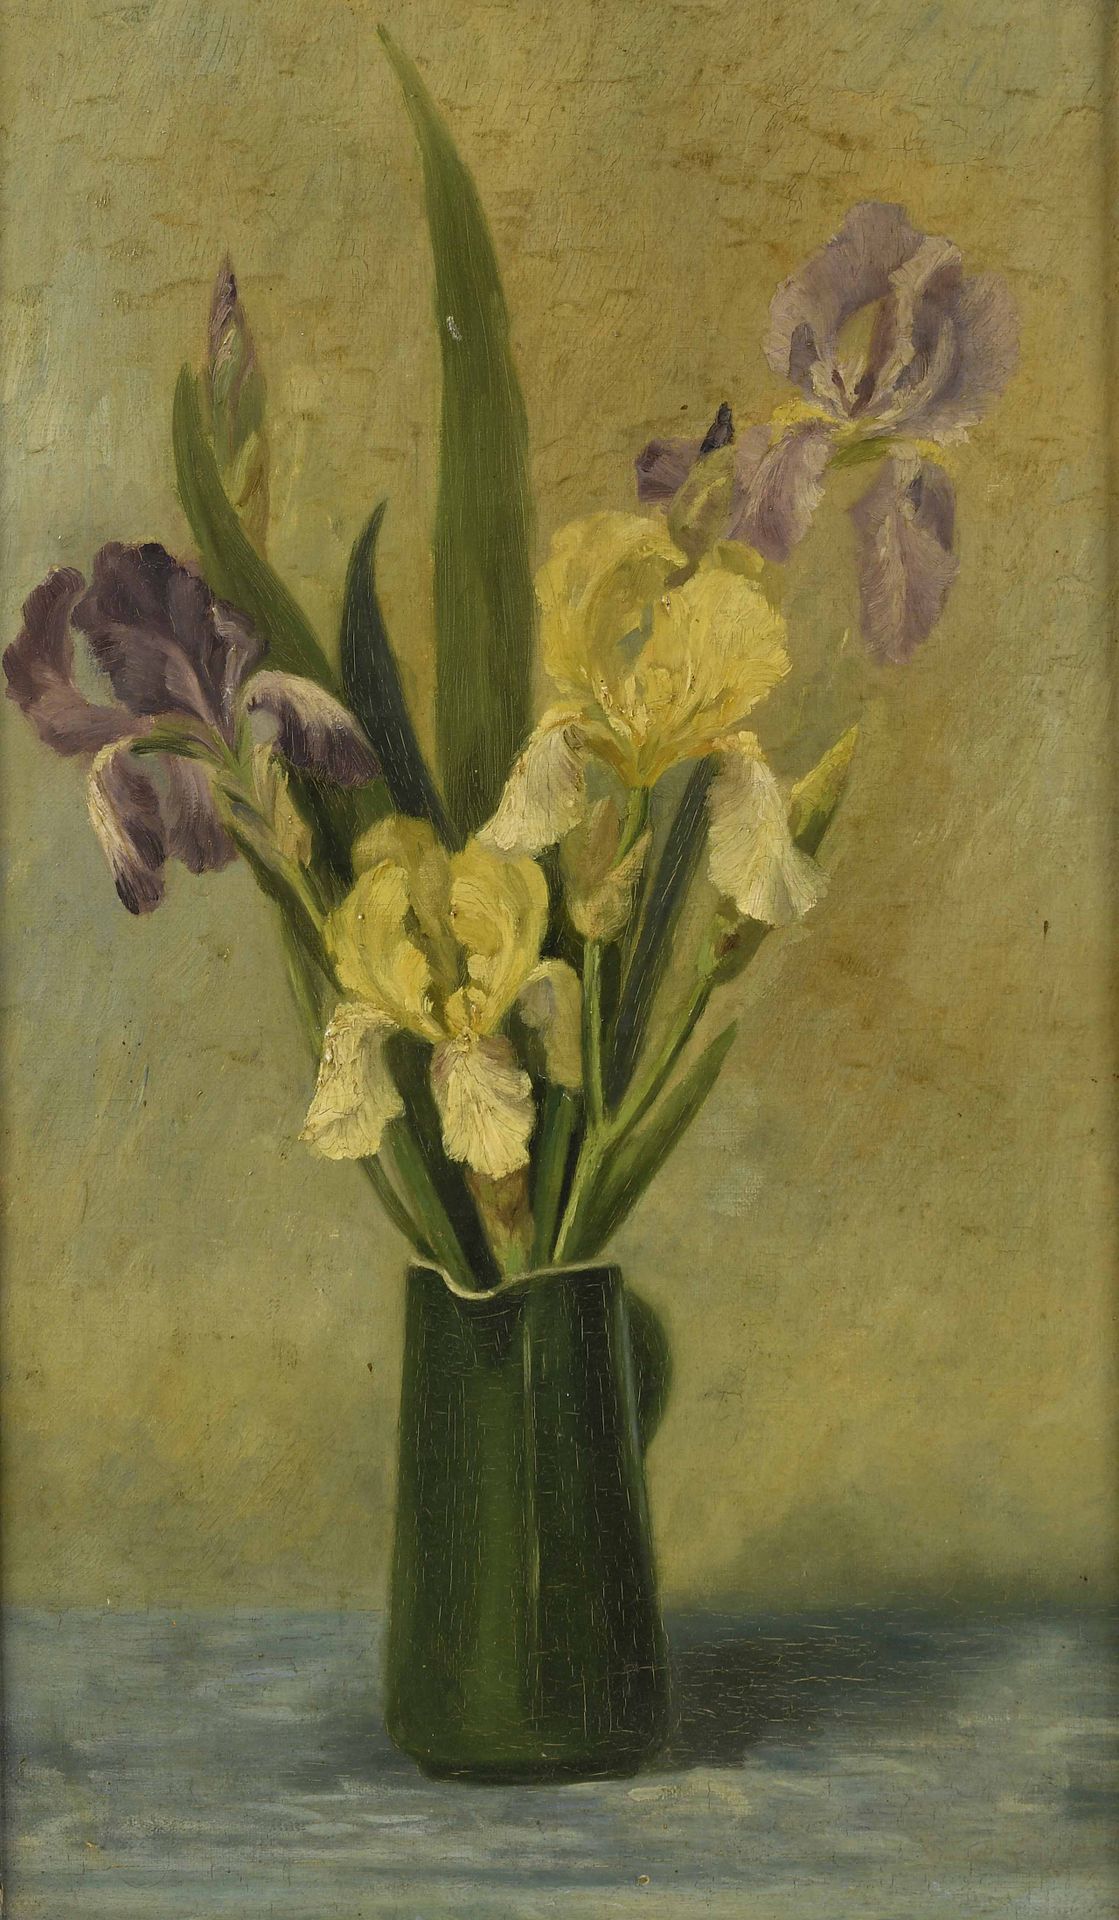 Null Yellow and purple iris
Oil on canvas.
55 x 33 cm